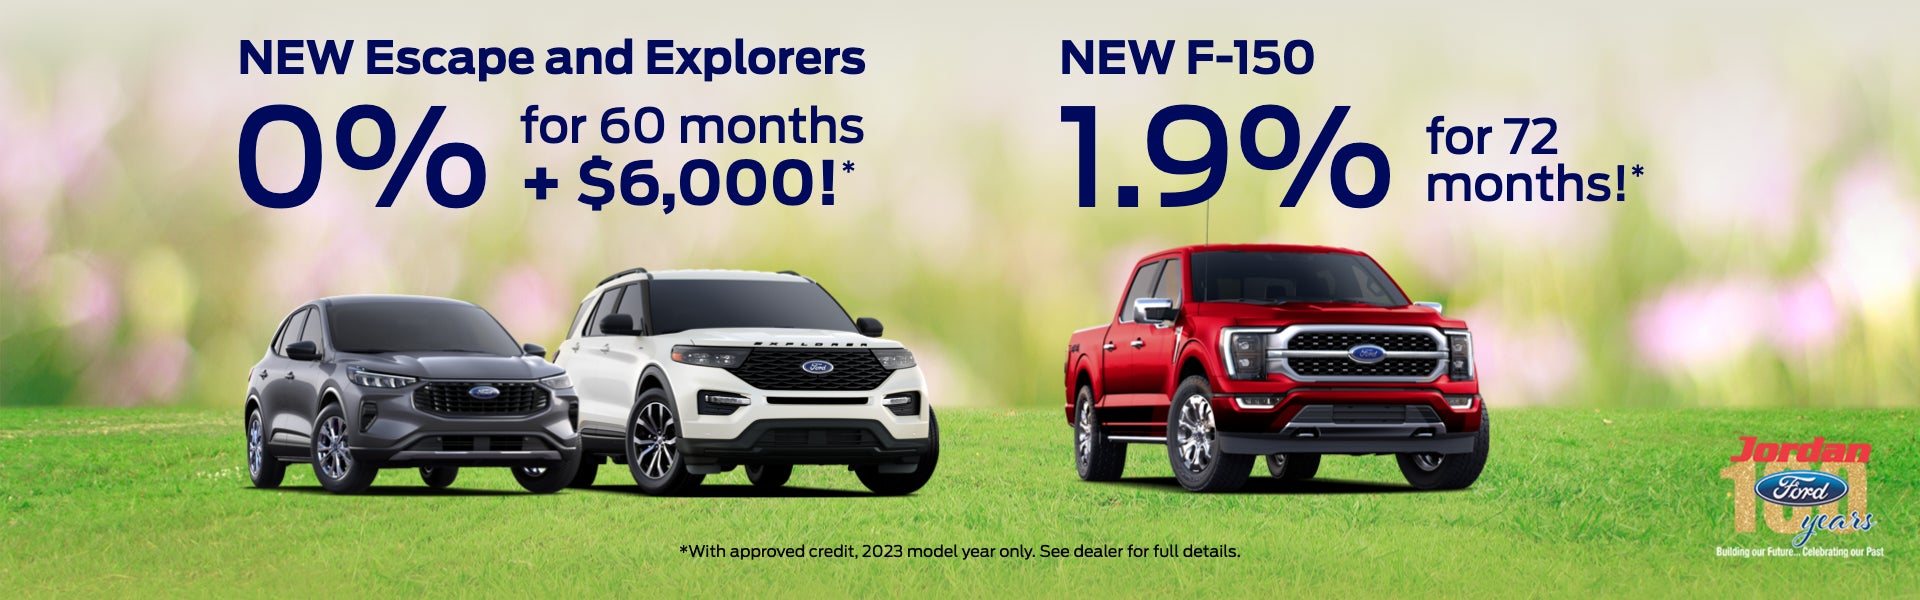 2023 Explorer and Escape 0% for 60 months, 2023 F-150 1.9% 